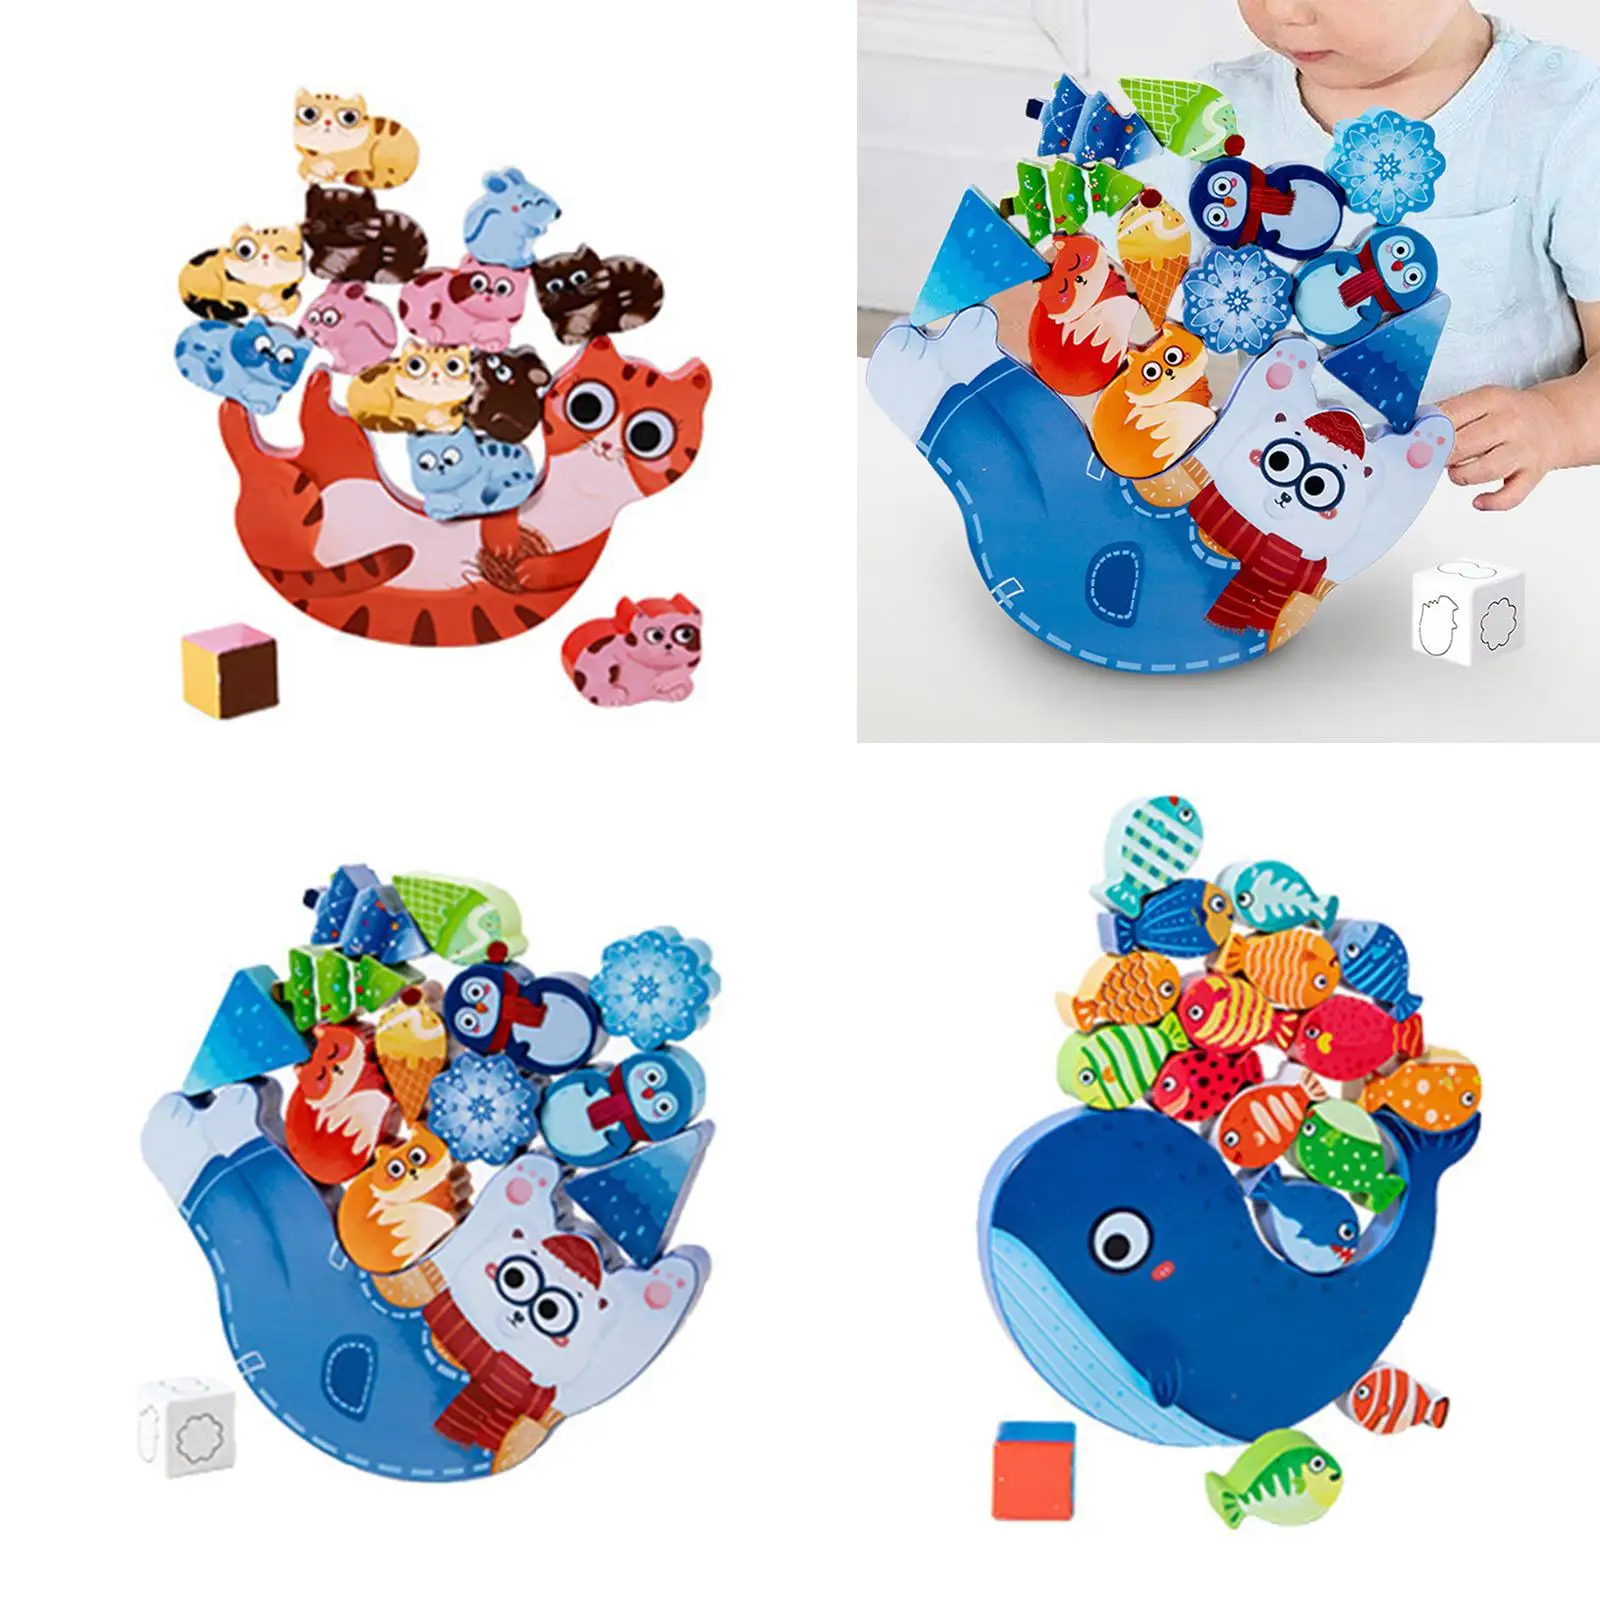 Montessori Educational Stacking Toys Stem Sensory Toys Puzzle Game for Children Kids Toddlers 1 2 3 4 5 Year Old Birthday Gift